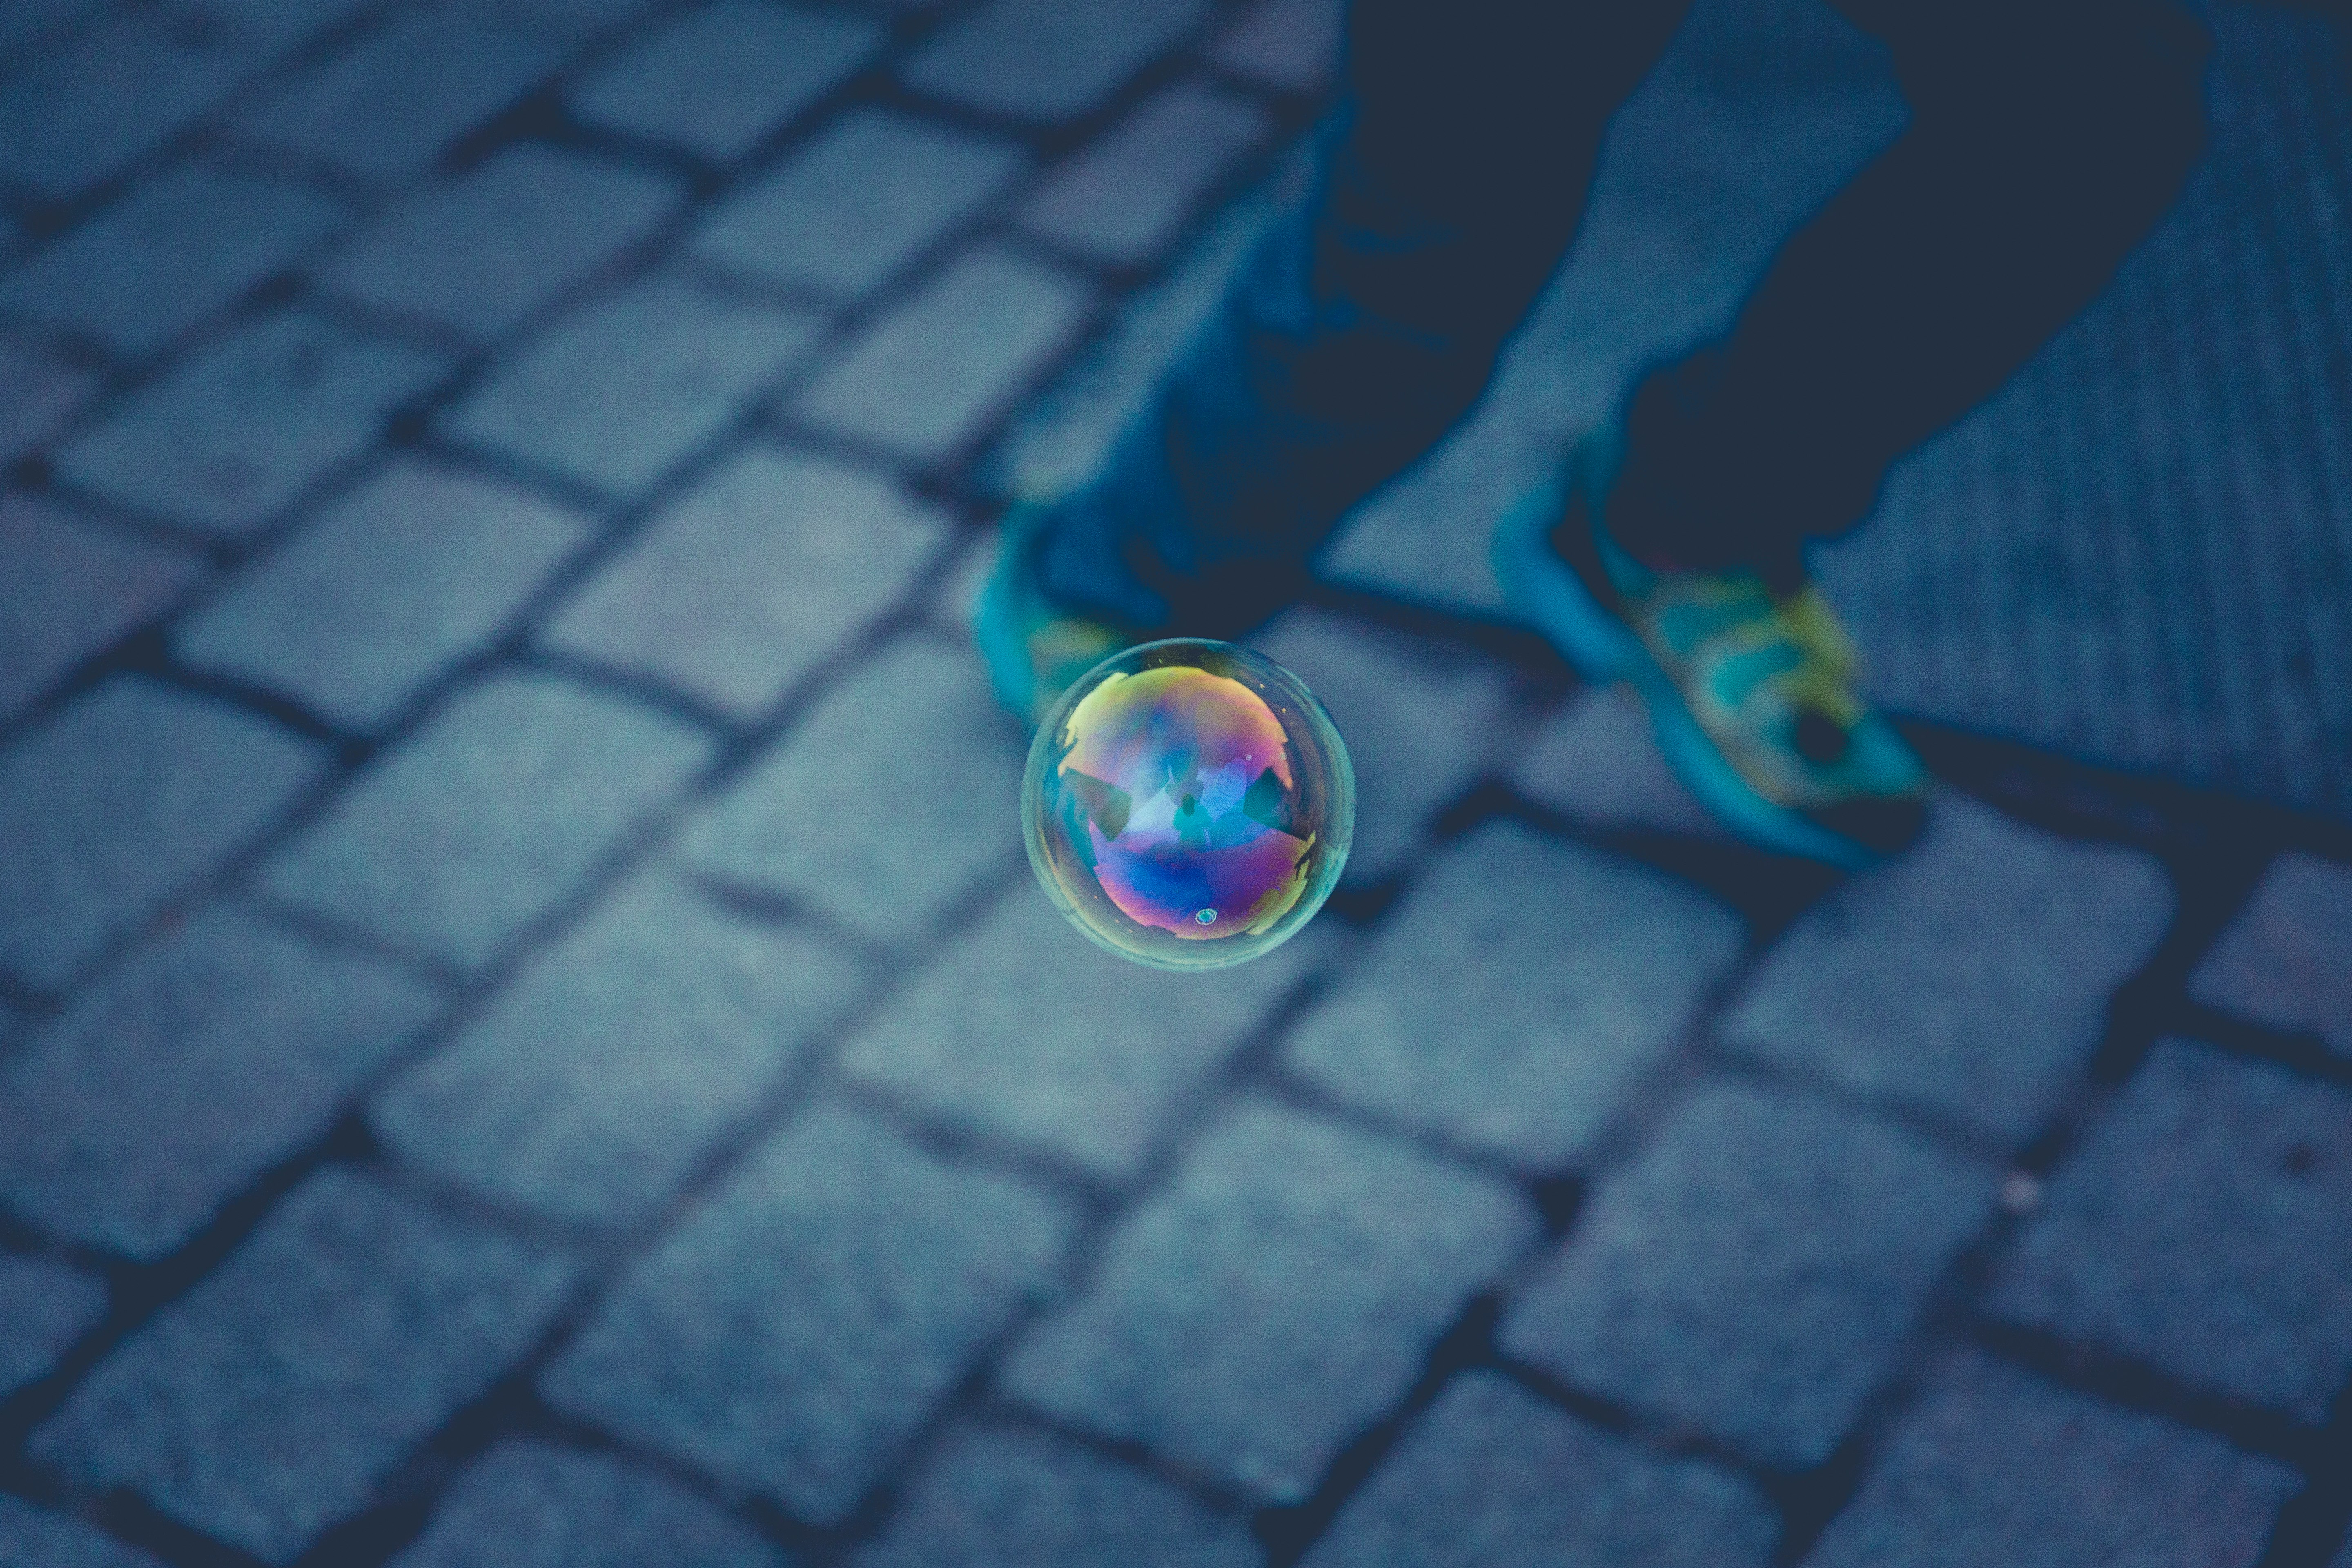 floating bubble near person running